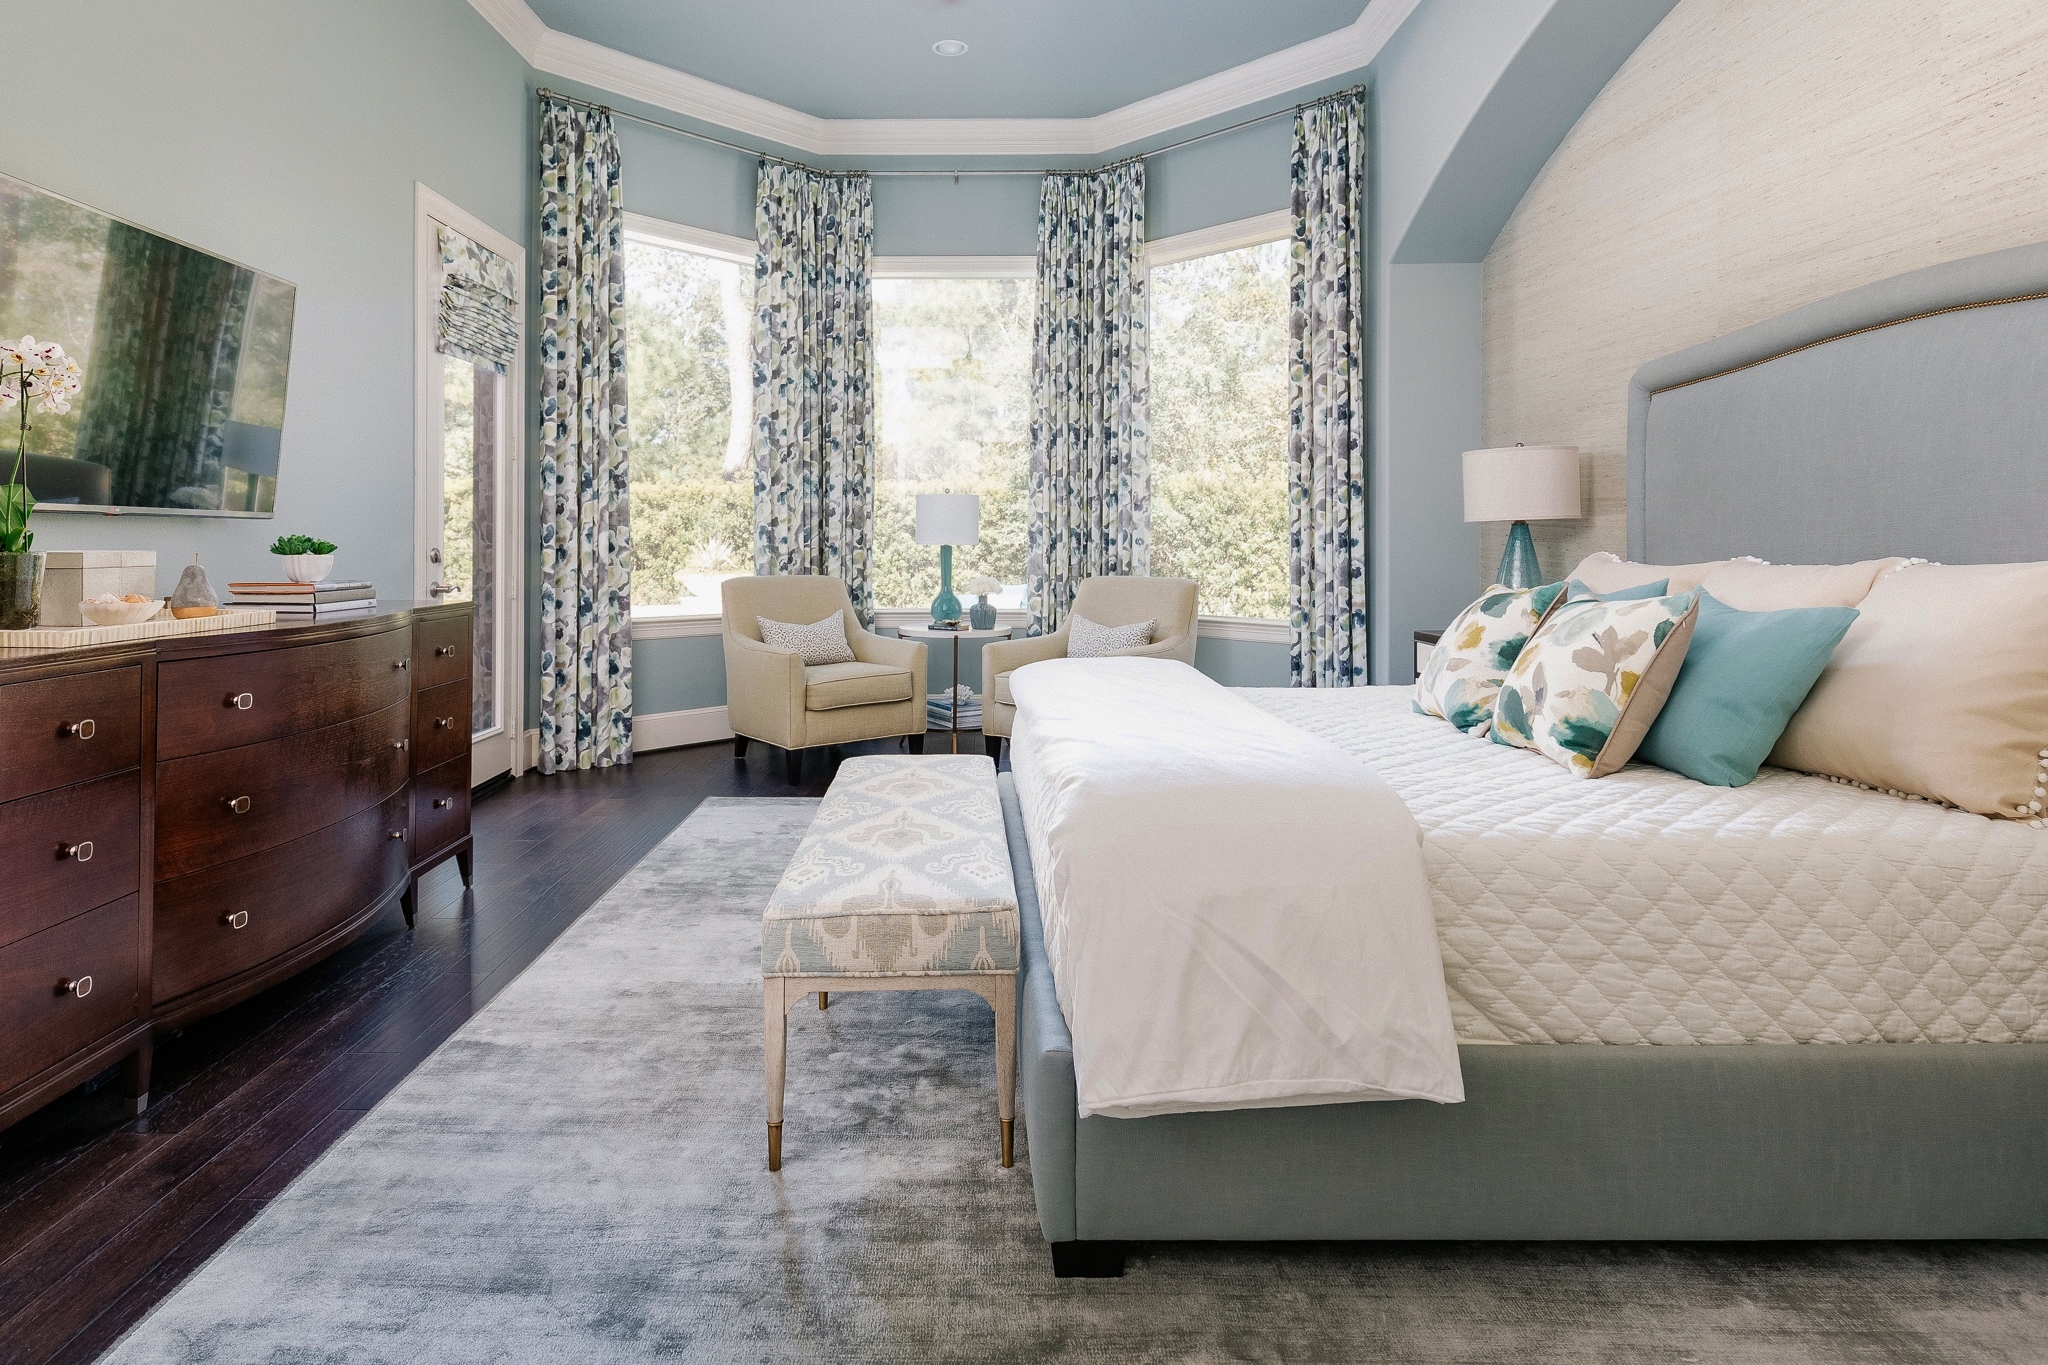 Traditional Master Bedroom In Floral Blue